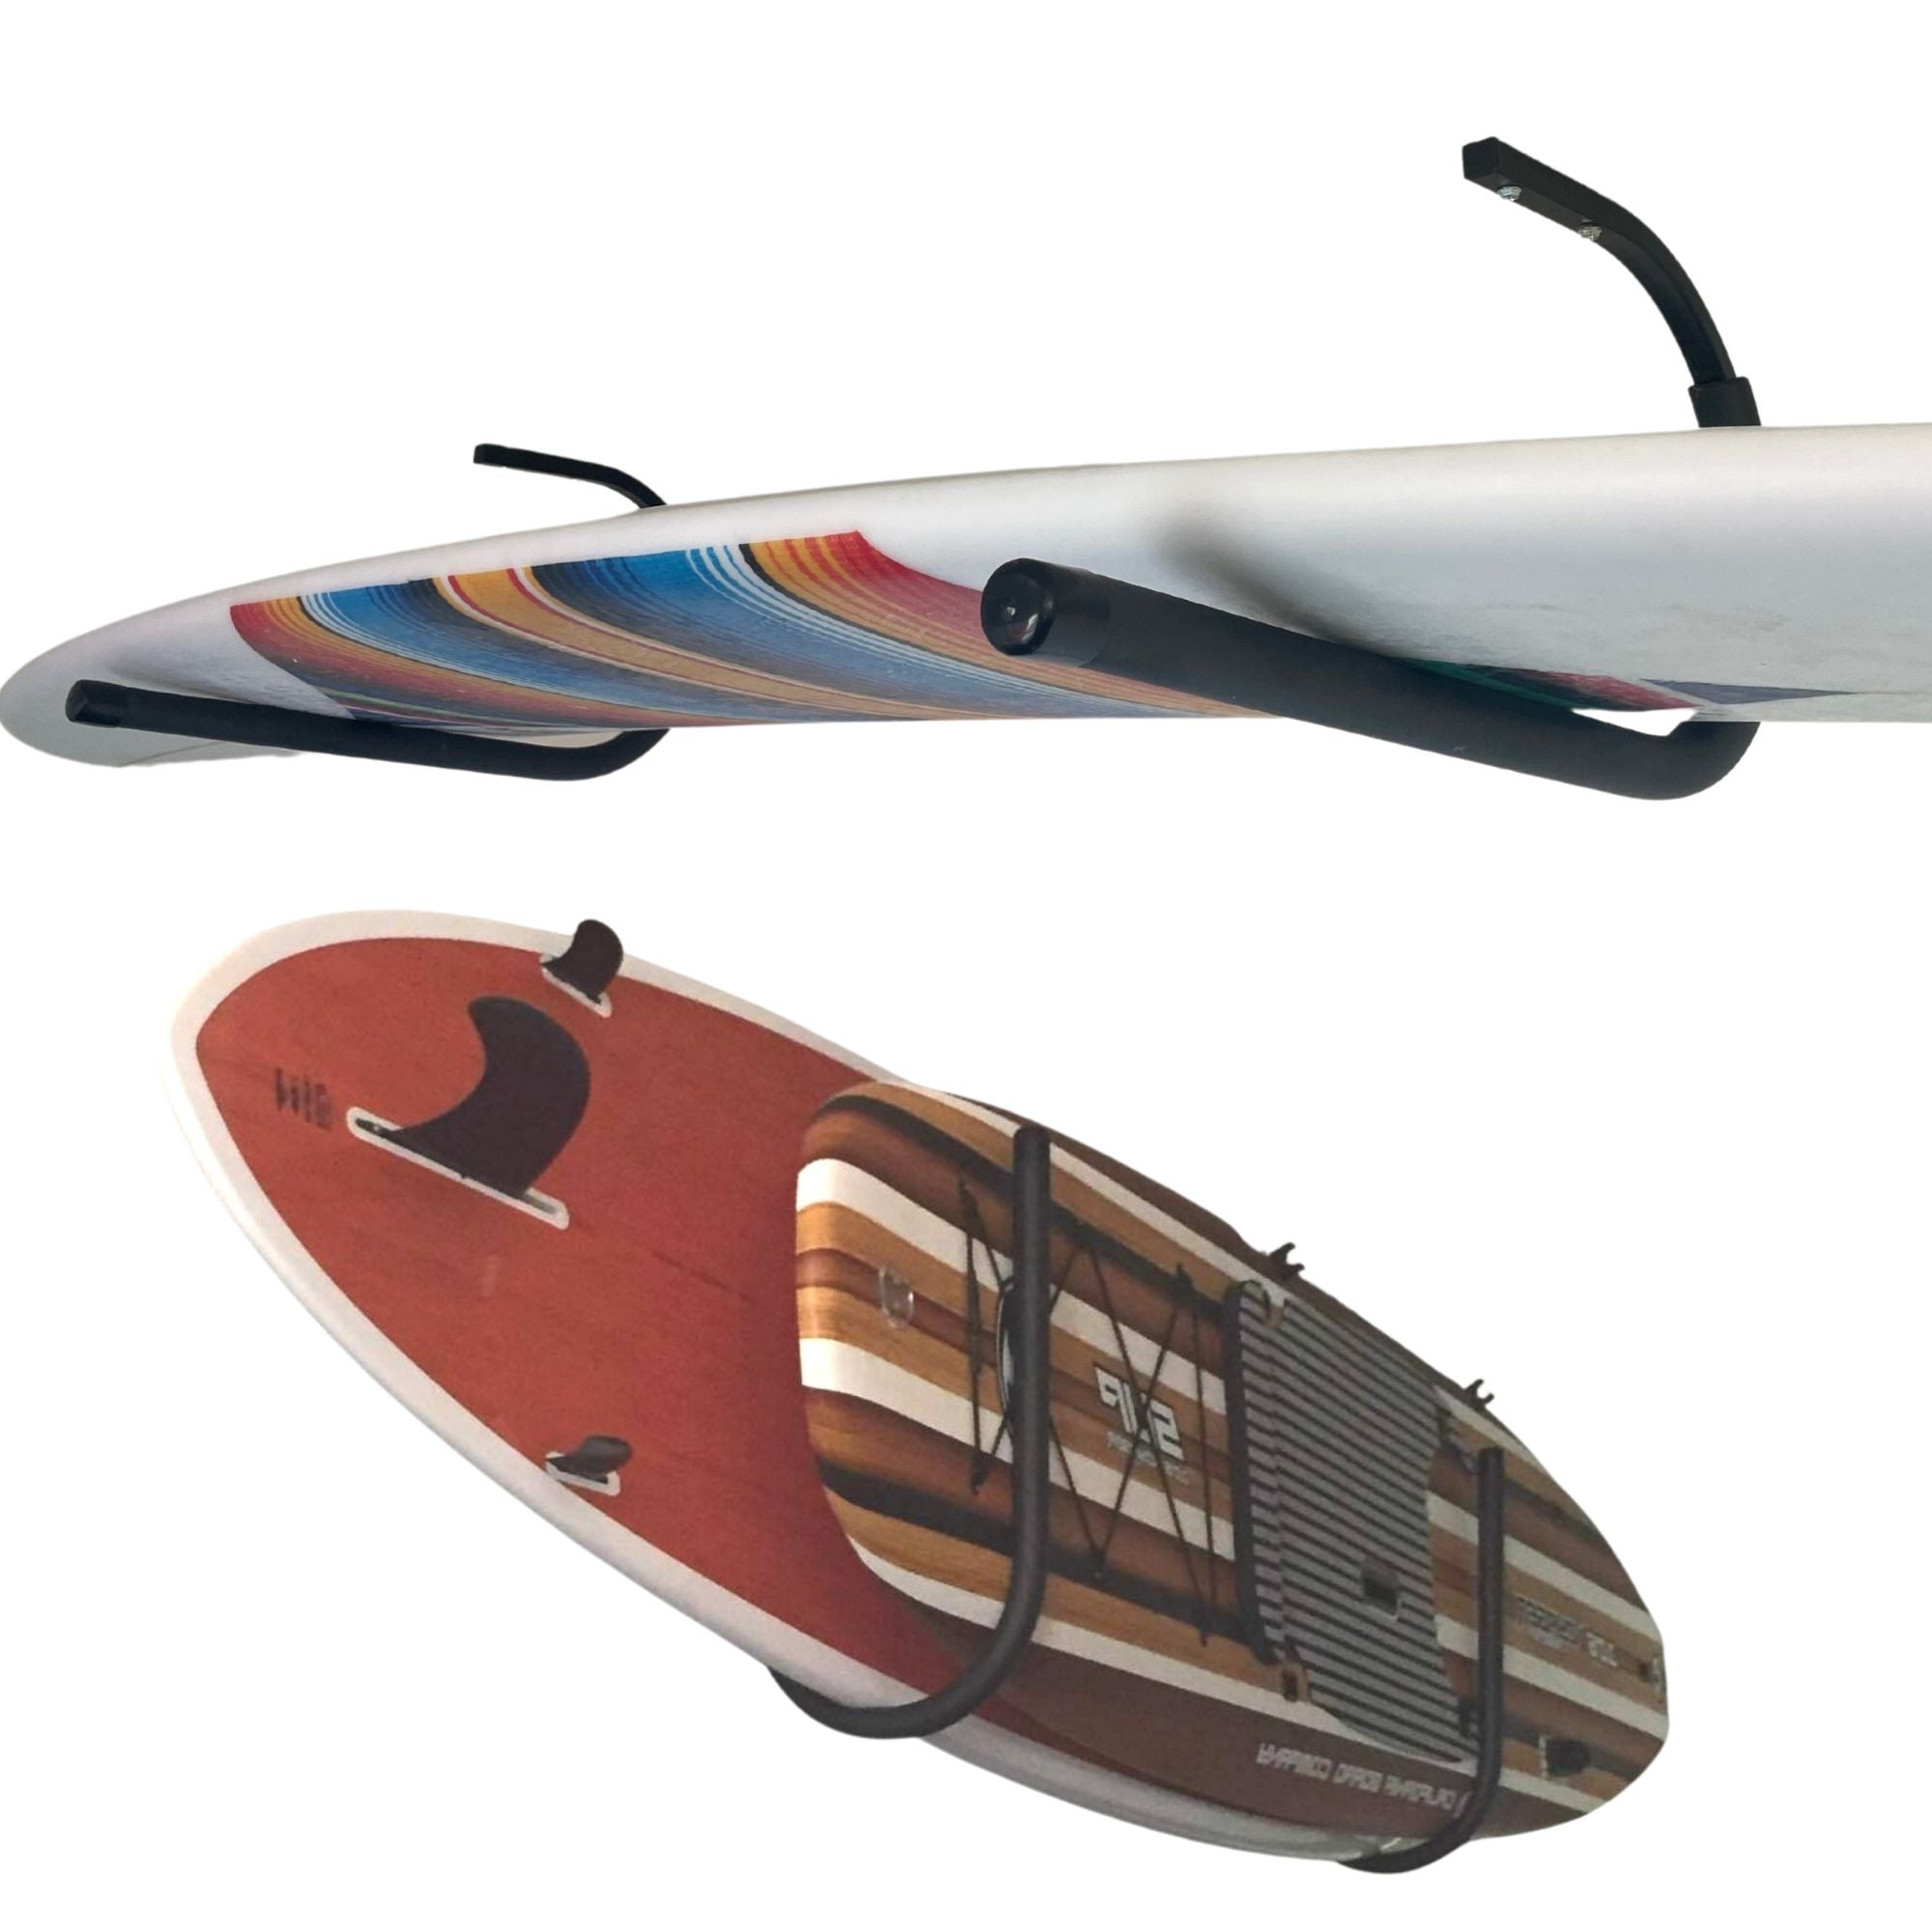 sup paddle-board wall storage mount for garage